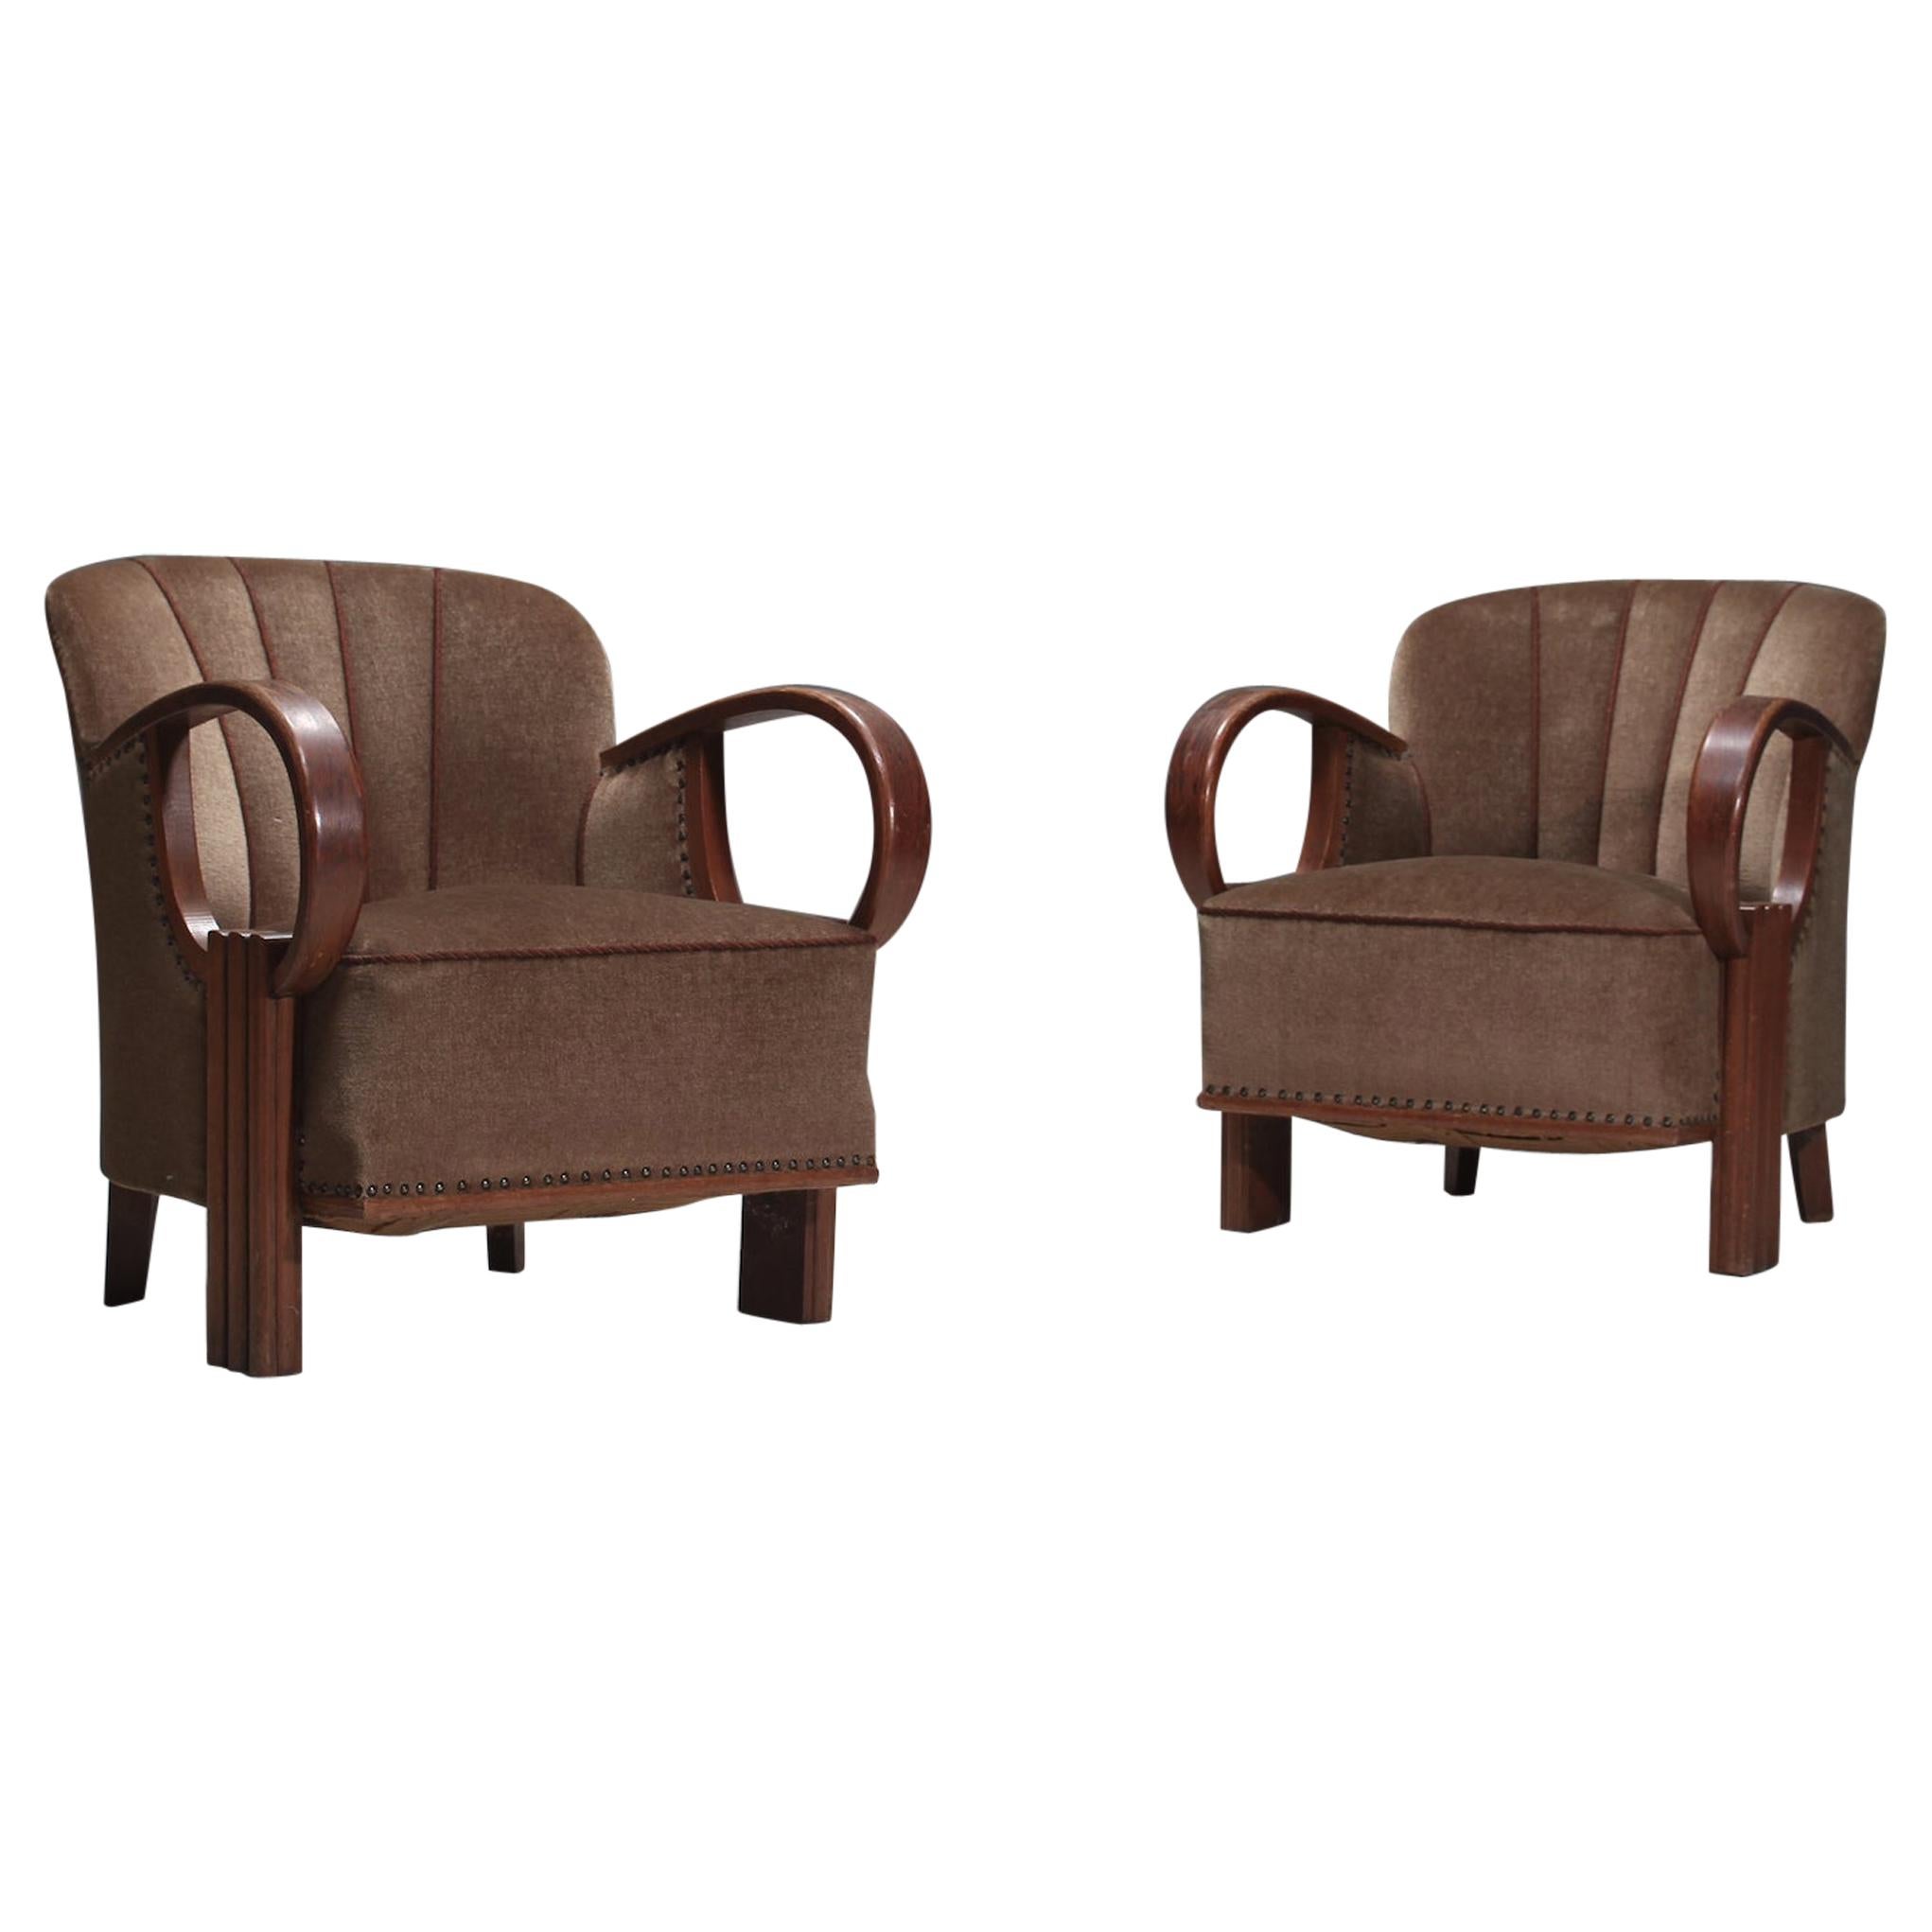 Pair of French Jean Pascaud Style Art Deco Club Chairs in Oak and Velvet, 1930s For Sale